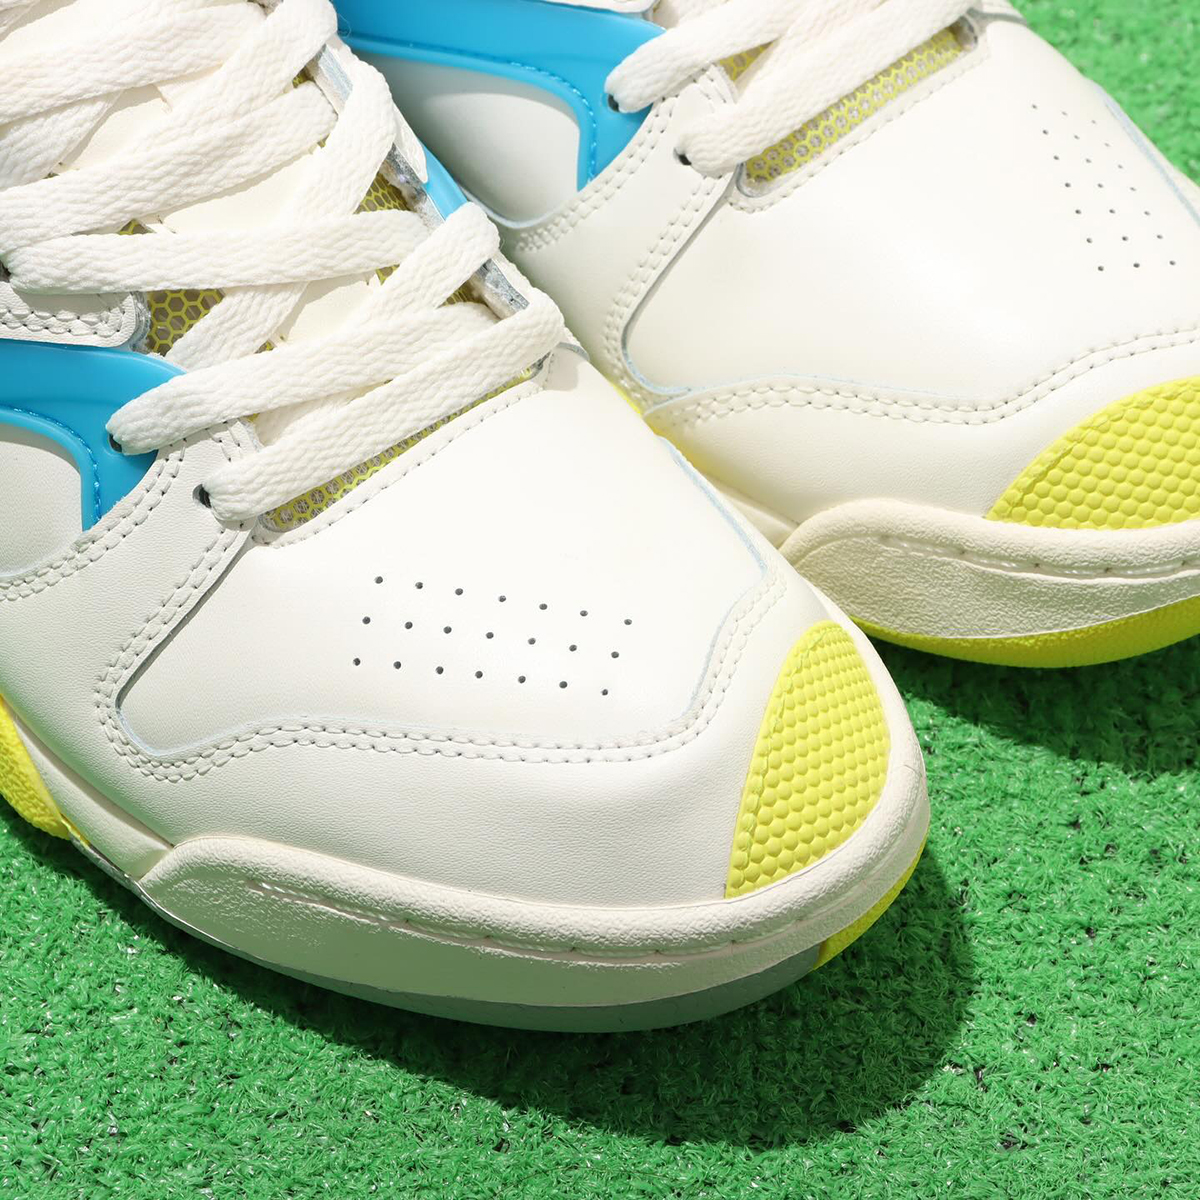 Reebok Embracing Tennis Heritage With Court Victory Pump Release